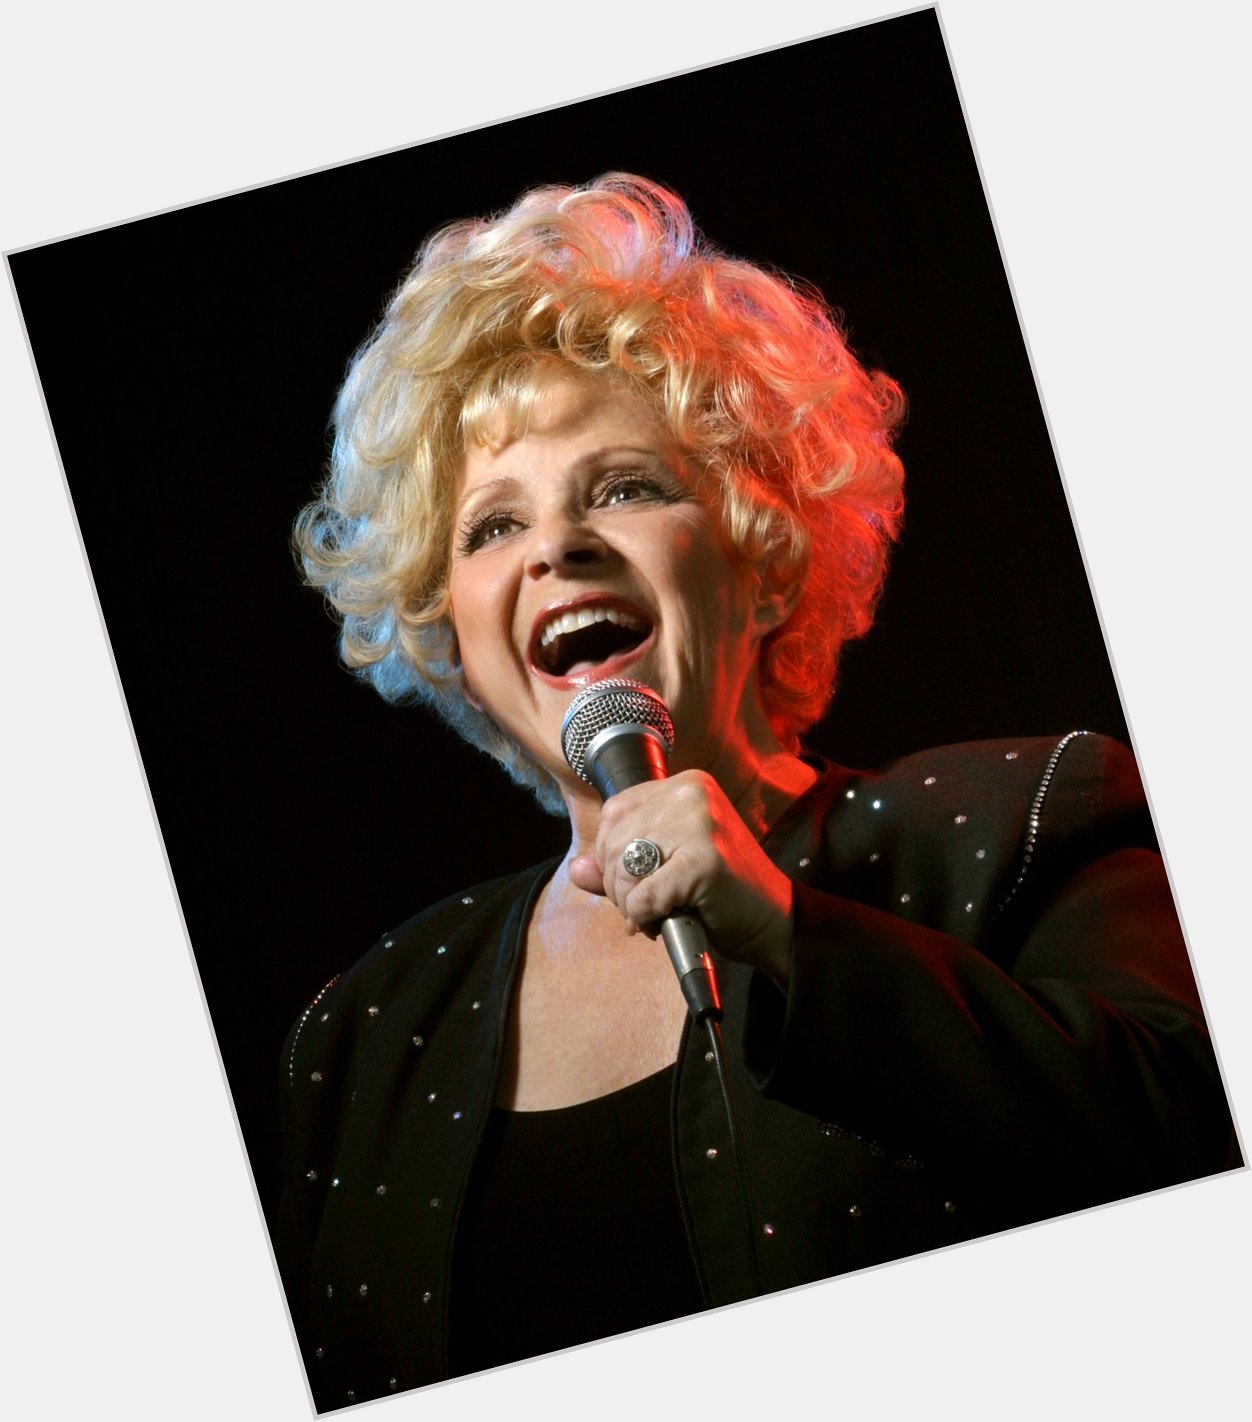 To join us in wishing Brenda Lee a very happy birthday! 